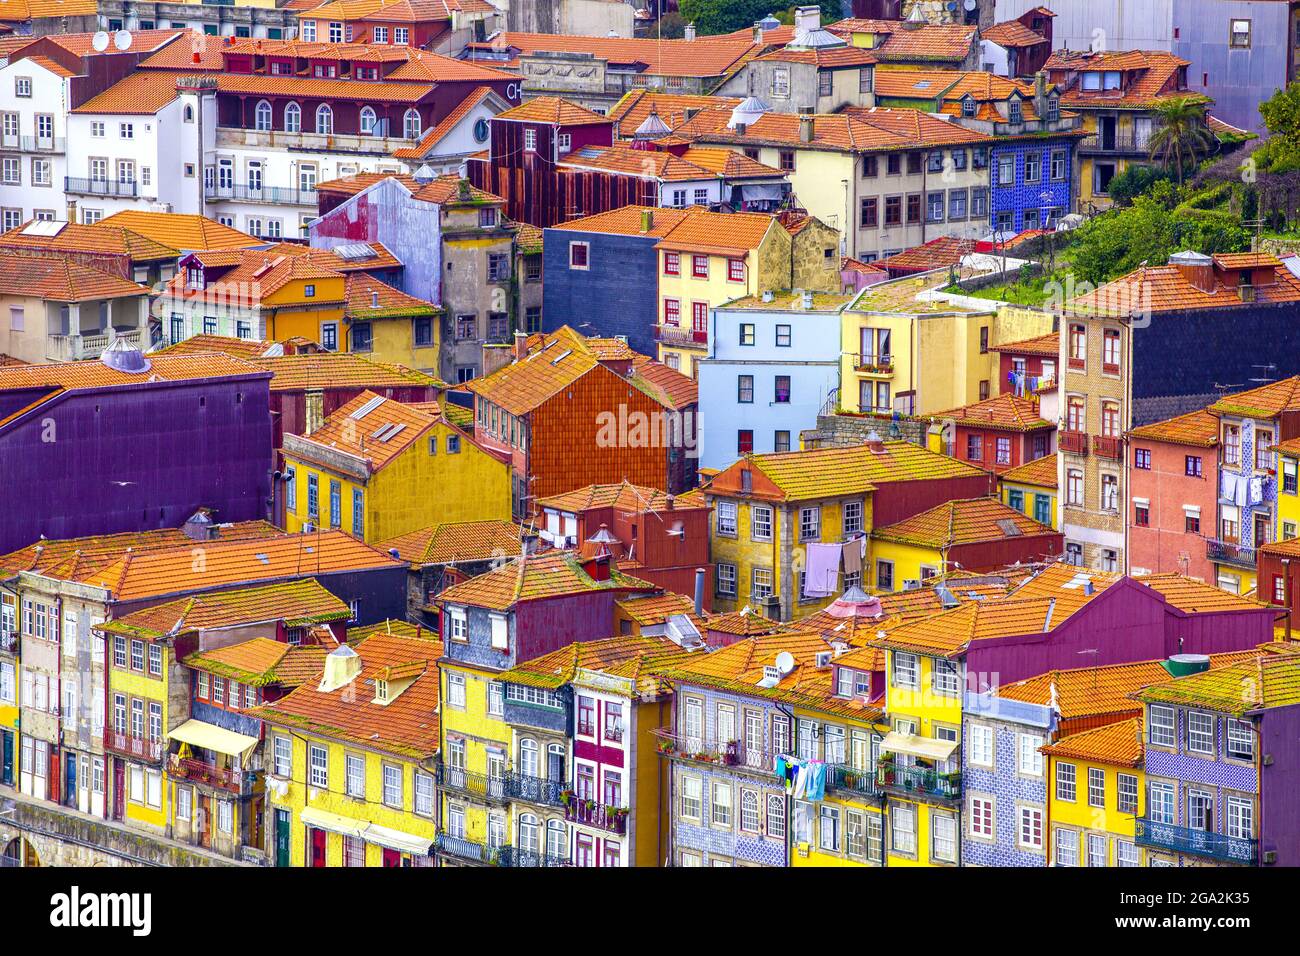 Traditional, colorful townhouses with their clay tiled rooftops compacted together in the old city center along the Douro riverside Stock Photo